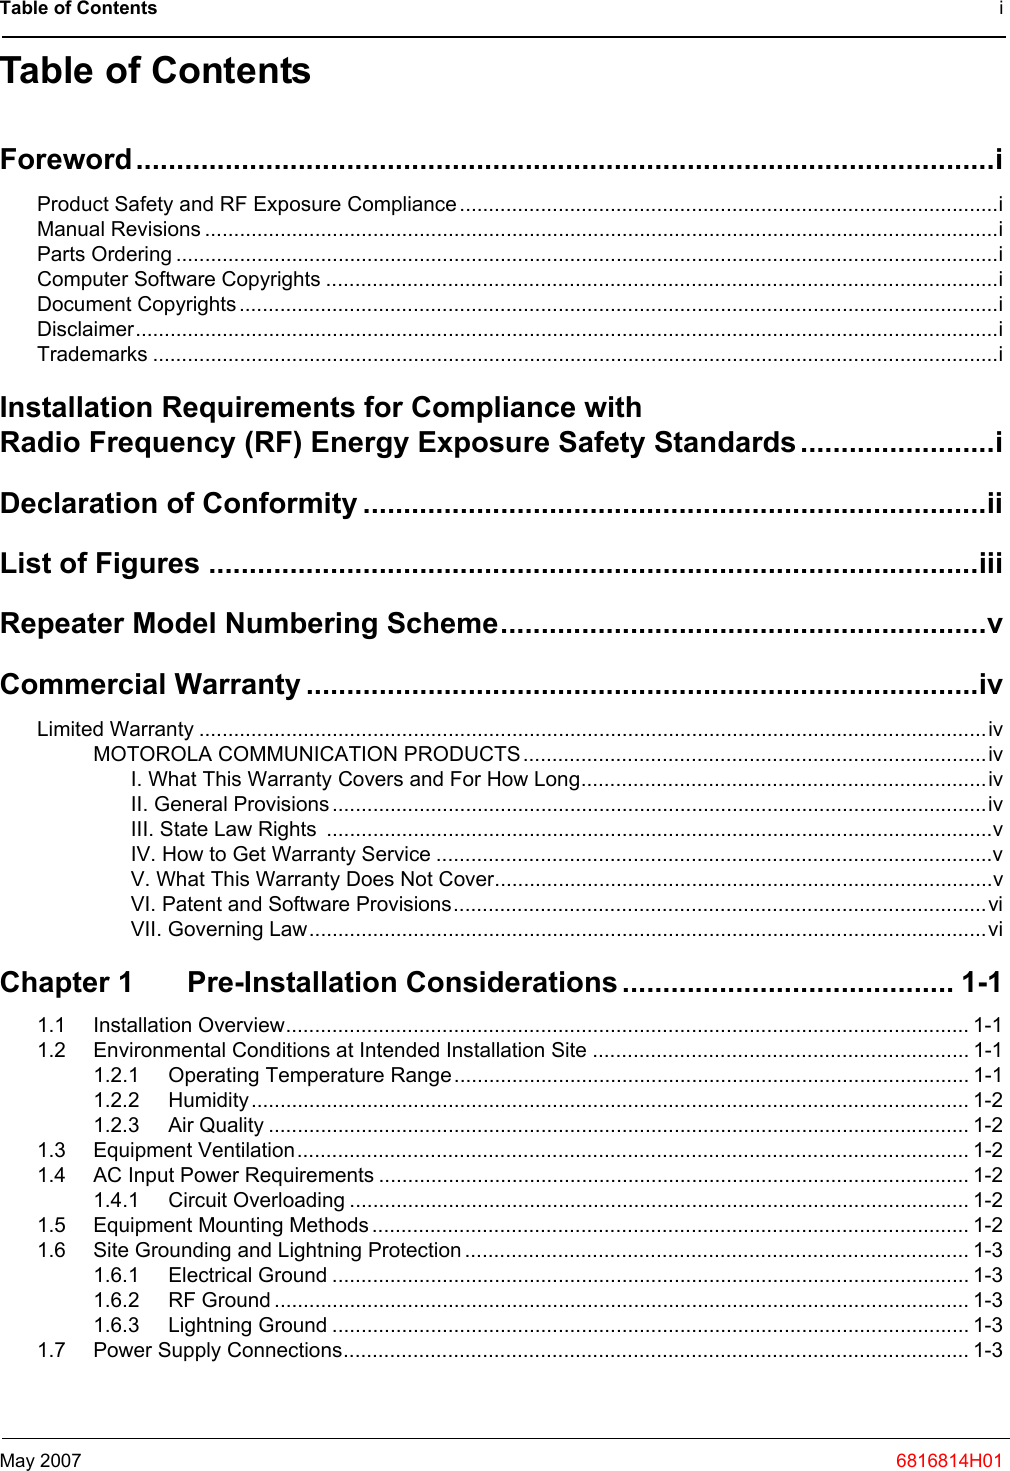 Table of Contents iMay 2007 6816814H01Table of ContentsForeword..........................................................................................................iProduct Safety and RF Exposure Compliance.............................................................................................iManual Revisions .........................................................................................................................................iParts Ordering ..............................................................................................................................................iComputer Software Copyrights ....................................................................................................................iDocument Copyrights...................................................................................................................................iDisclaimer.....................................................................................................................................................iTrademarks ..................................................................................................................................................iInstallation Requirements for Compliance with Radio Frequency (RF) Energy Exposure Safety Standards........................iDeclaration of Conformity .............................................................................iiList of Figures ...............................................................................................iiiRepeater Model Numbering Scheme............................................................vCommercial Warranty ...................................................................................ivLimited Warranty ........................................................................................................................................ivMOTOROLA COMMUNICATION PRODUCTS................................................................................ivI. What This Warranty Covers and For How Long......................................................................ivII. General Provisions .................................................................................................................ivIII. State Law Rights  ...................................................................................................................vIV. How to Get Warranty Service ................................................................................................vV. What This Warranty Does Not Cover......................................................................................vVI. Patent and Software Provisions............................................................................................viVII. Governing Law.....................................................................................................................viChapter 1 Pre-Installation Considerations......................................... 1-11.1 Installation Overview...................................................................................................................... 1-11.2 Environmental Conditions at Intended Installation Site ................................................................. 1-11.2.1 Operating Temperature Range......................................................................................... 1-11.2.2 Humidity............................................................................................................................ 1-21.2.3 Air Quality ......................................................................................................................... 1-21.3 Equipment Ventilation.................................................................................................................... 1-21.4 AC Input Power Requirements ...................................................................................................... 1-21.4.1 Circuit Overloading ........................................................................................................... 1-21.5 Equipment Mounting Methods ....................................................................................................... 1-21.6 Site Grounding and Lightning Protection ....................................................................................... 1-31.6.1 Electrical Ground .............................................................................................................. 1-31.6.2 RF Ground ........................................................................................................................ 1-31.6.3 Lightning Ground .............................................................................................................. 1-31.7 Power Supply Connections............................................................................................................ 1-3